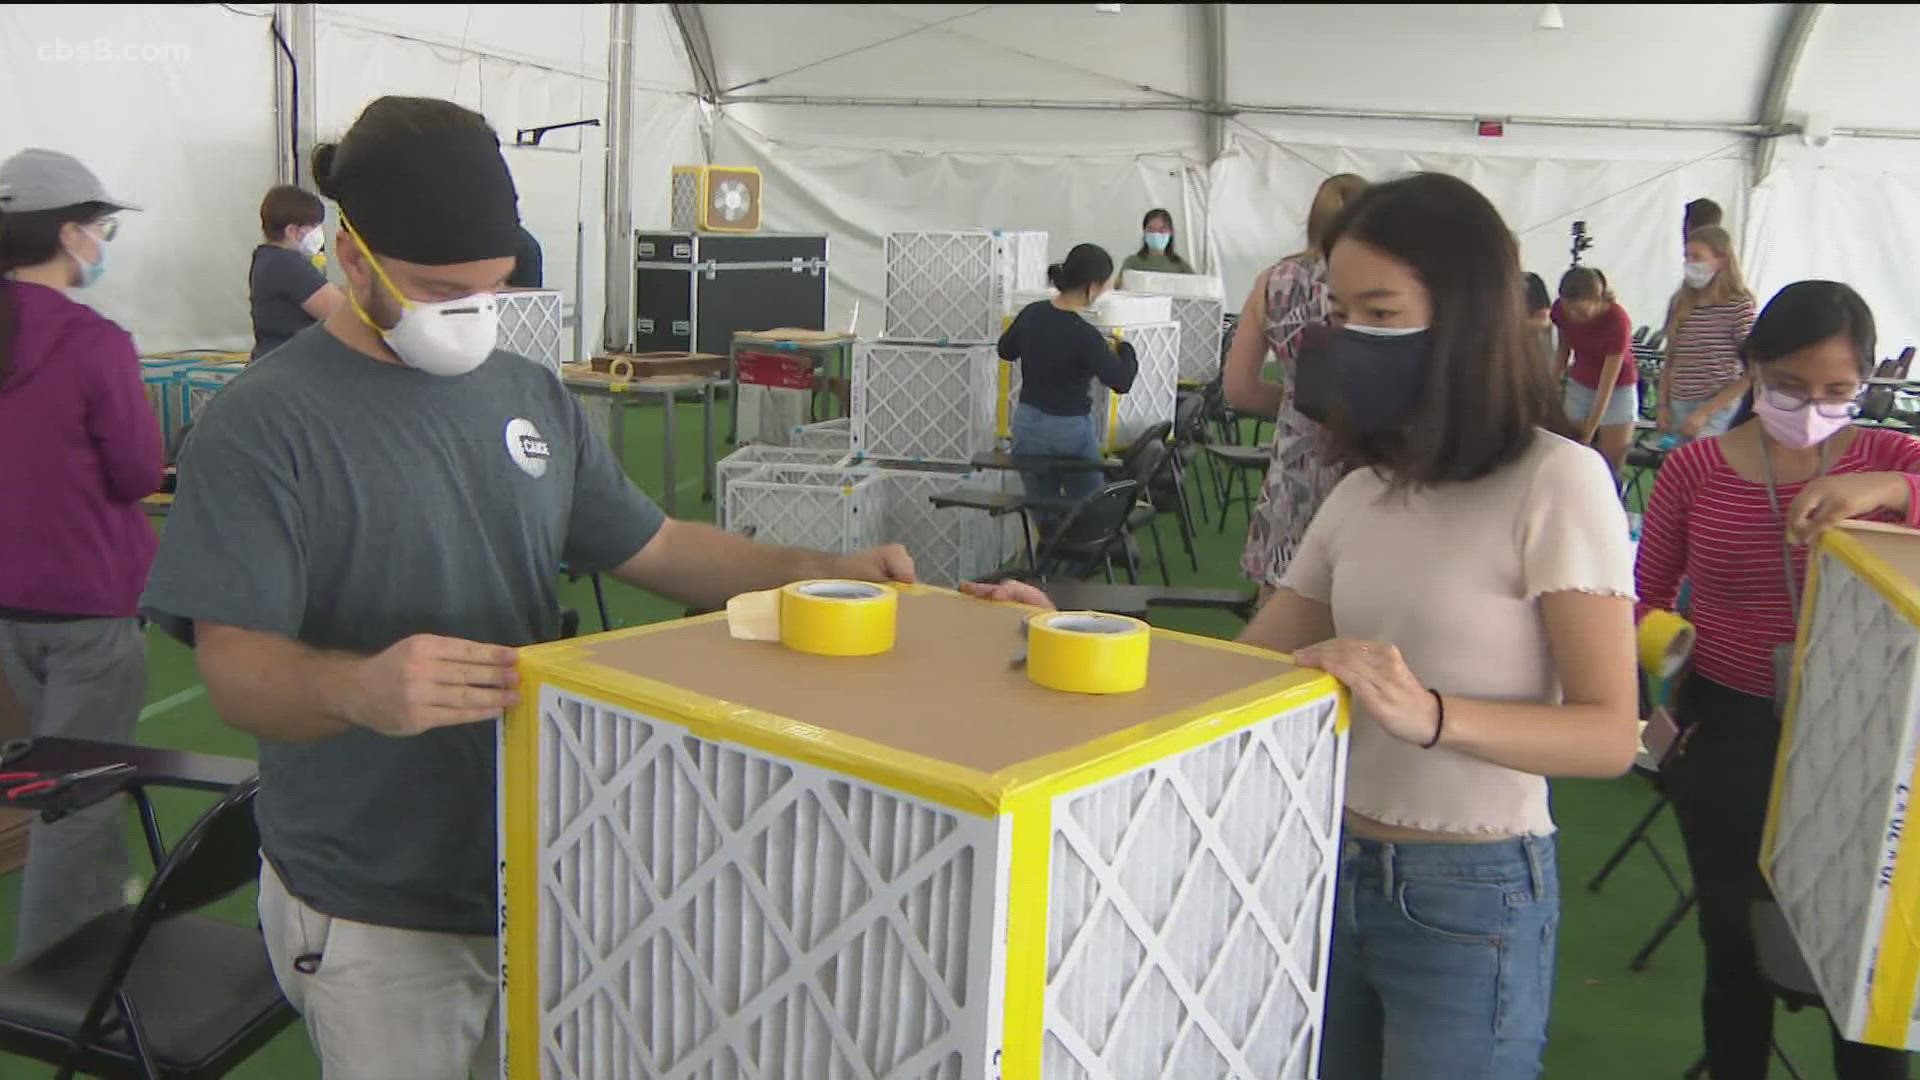 Just one day before classes began, UCSD students and staff helped make their classrooms safer against COVID-19 by building DIY air filters out of boxes and fans.